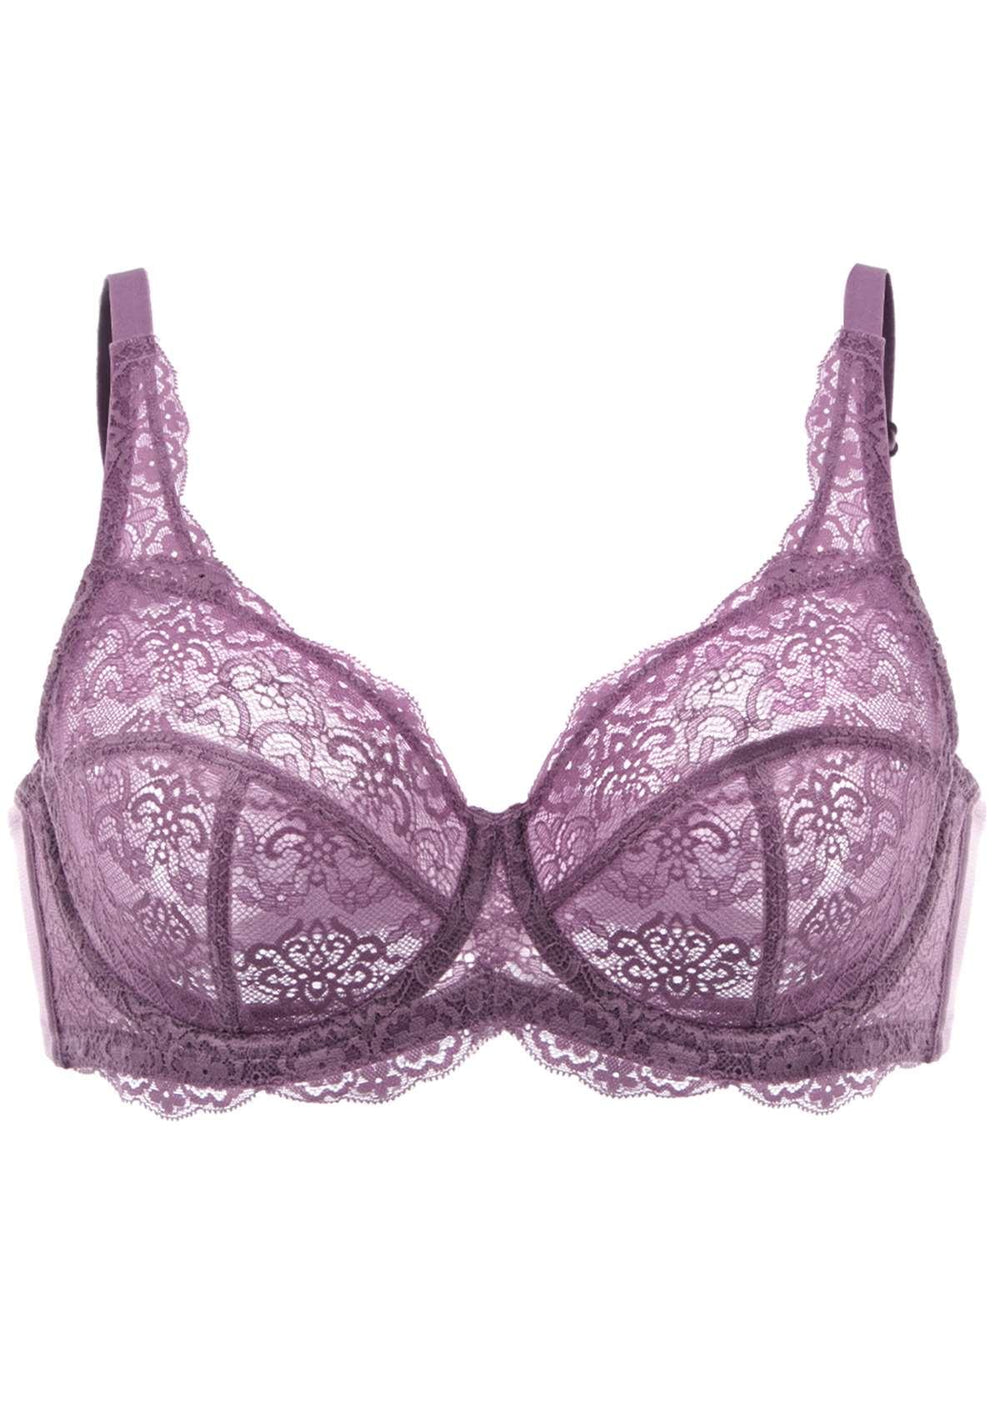 Marks & Spencer Women's Floral Lace Minimizer Full Cup Bras, Sheer